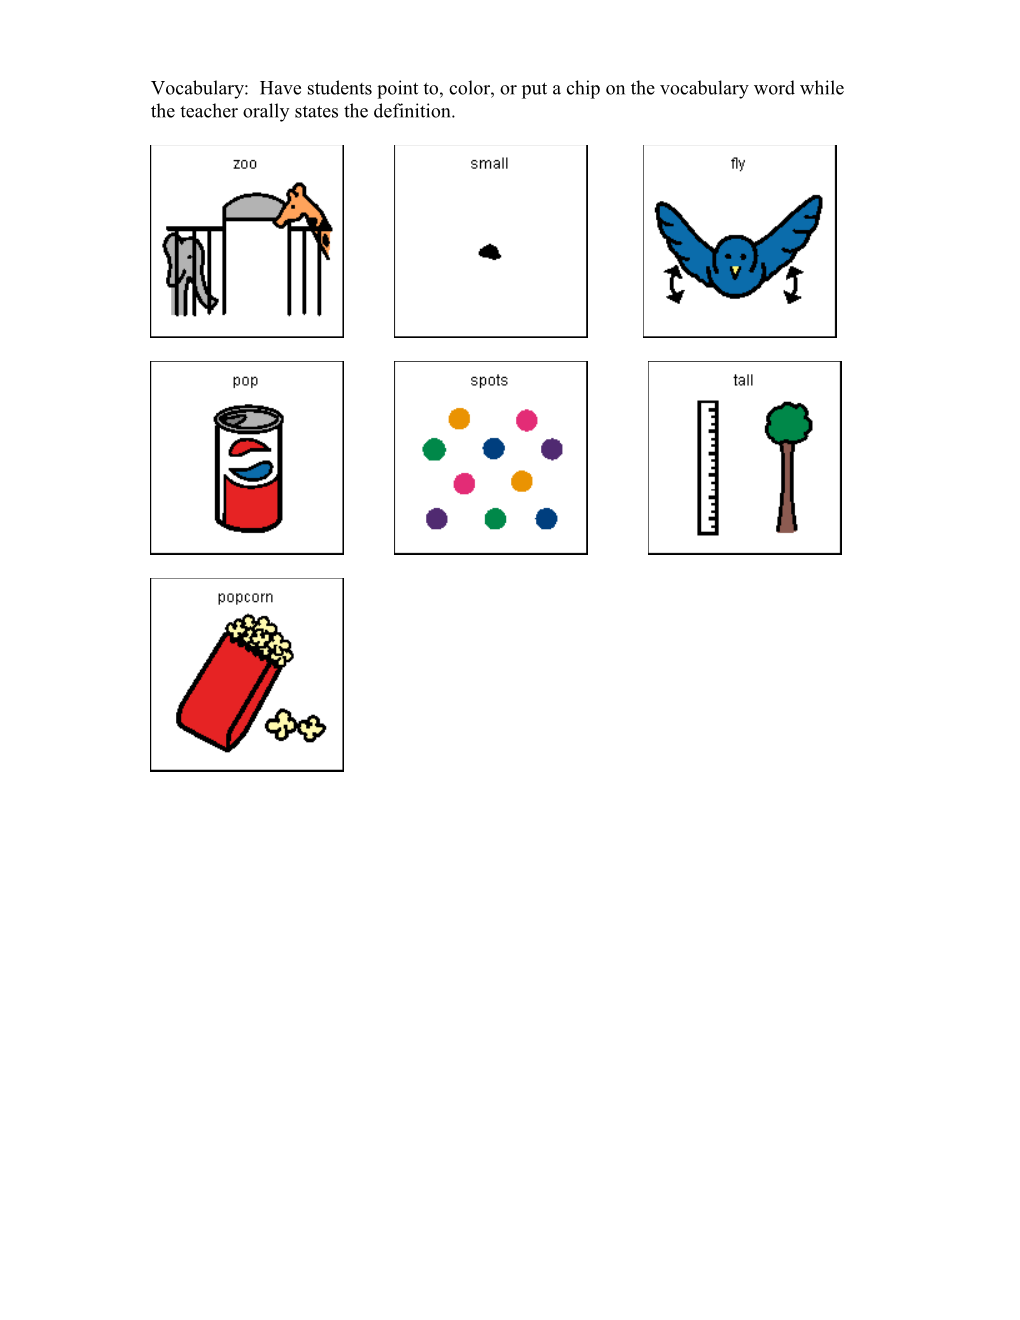 Vocabulary: Have Students Point To, Color, Or Put a Chip on the Vocabulary Word While The